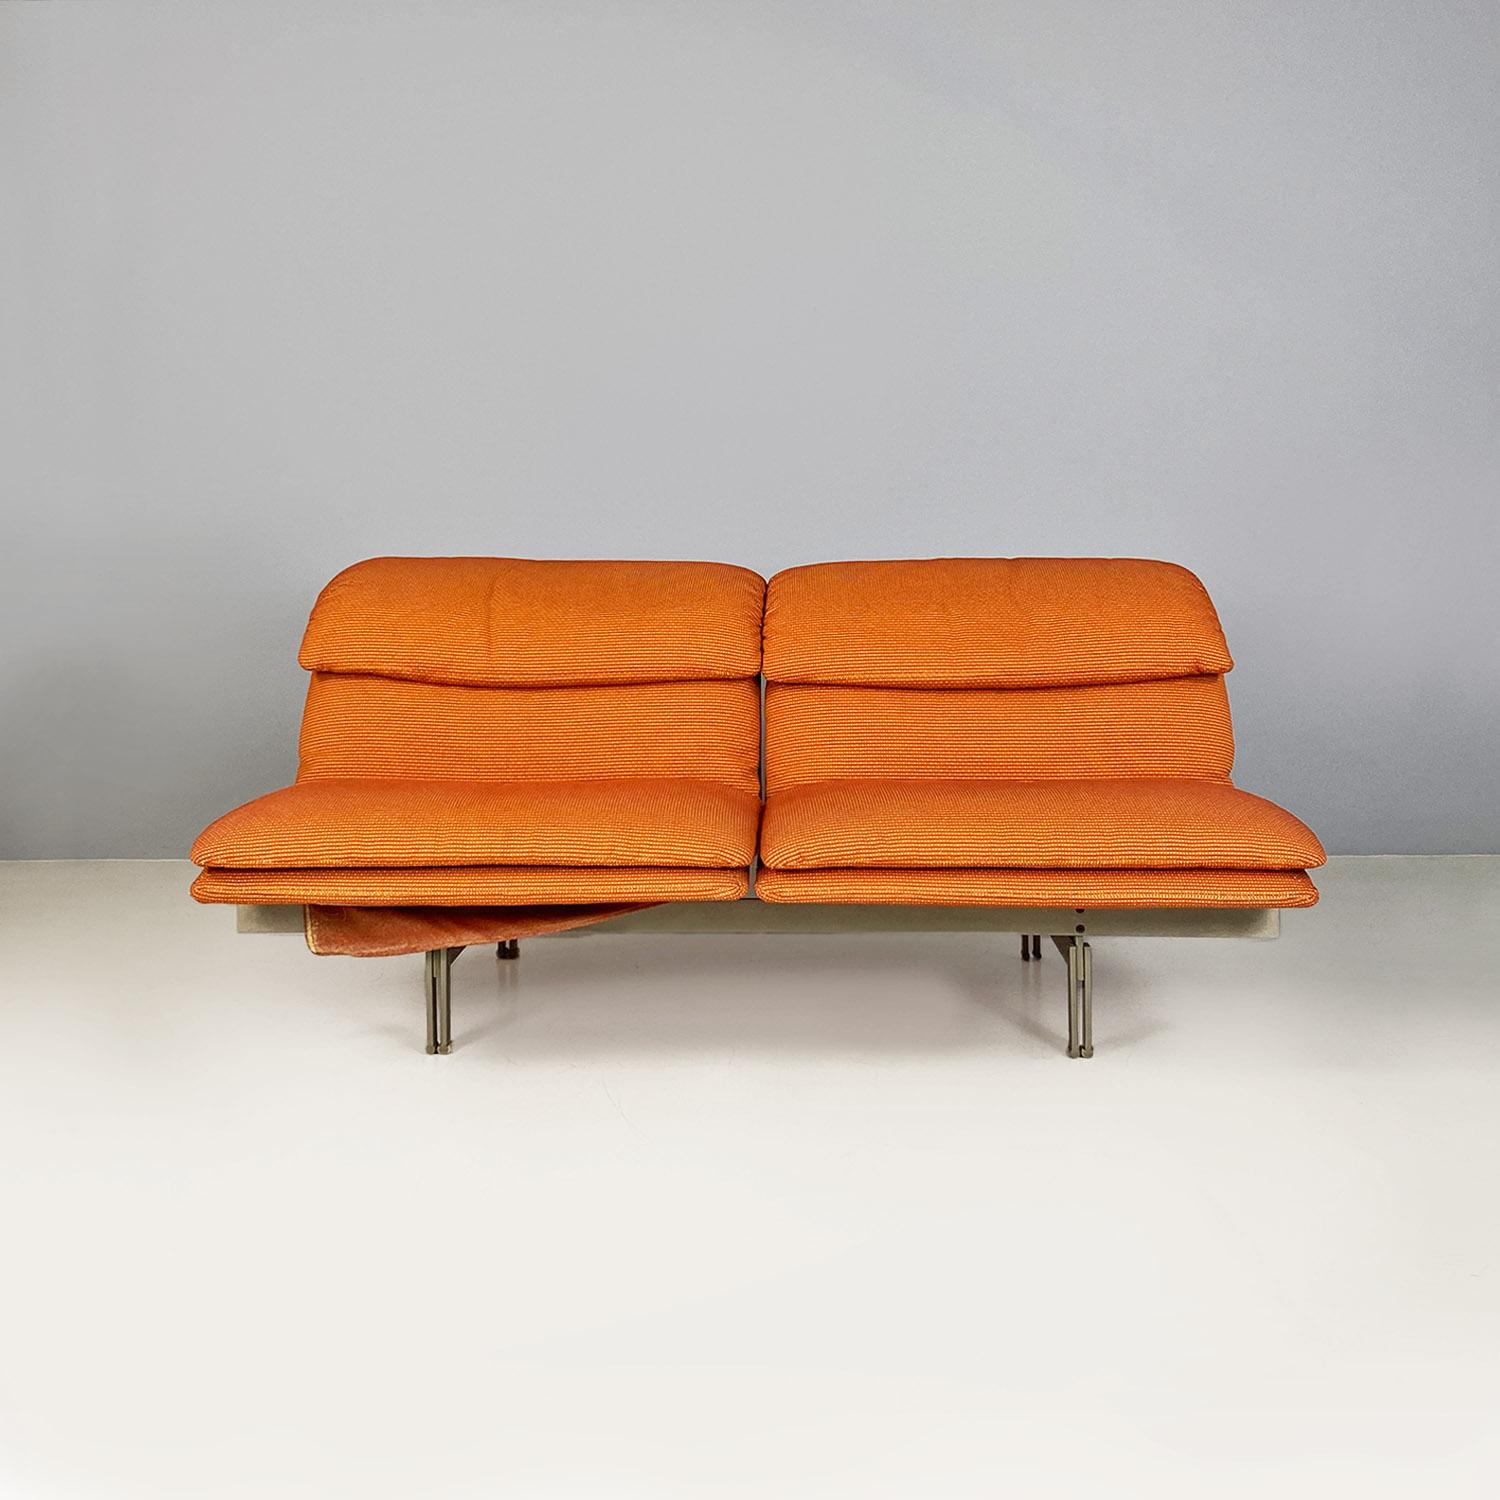 Italian modern steel and fabric Wave sofa by Giovanni Offredi for Saporiti Italia, 1974.
Wave model two seater sofa, with original orange fabric and satin steel structure and legs.
Produced by Saporiti Italia, based on a design by Giovanni Offredi,